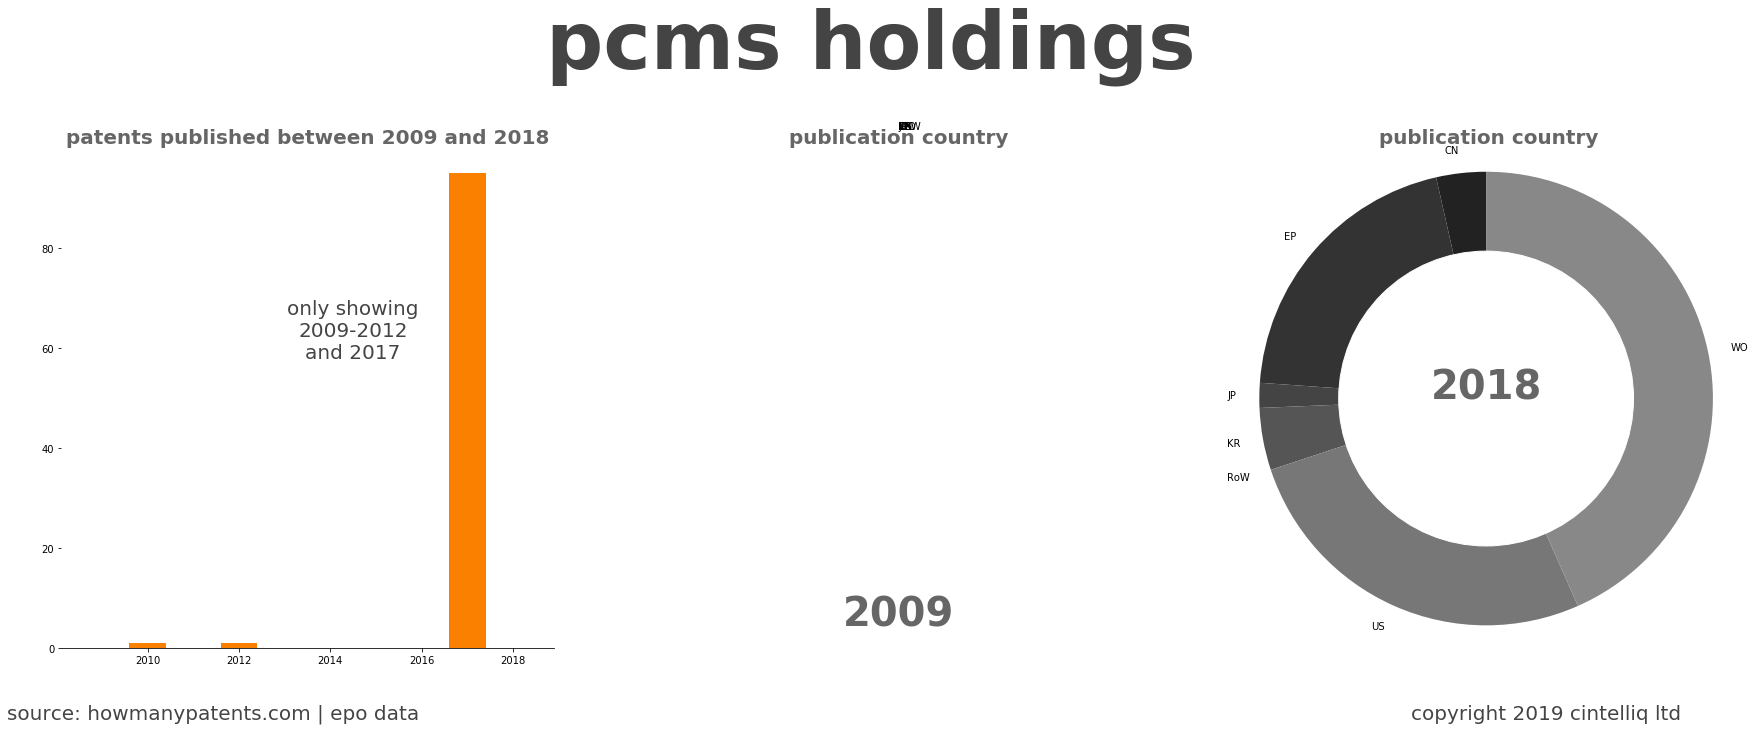 summary of patents for Pcms Holdings